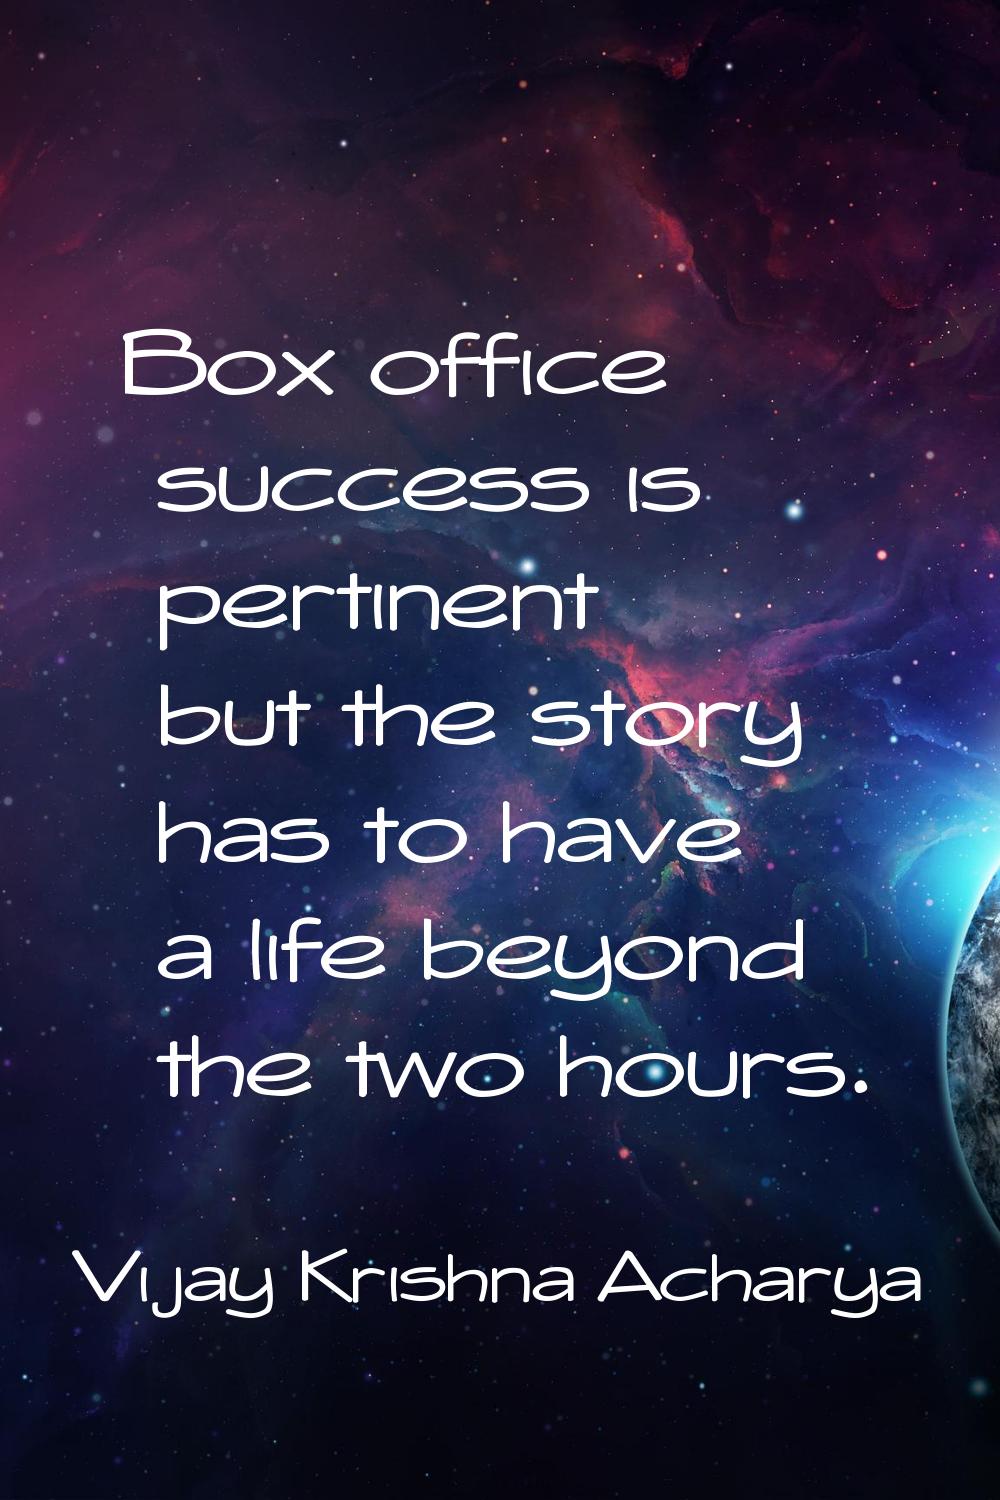 Box office success is pertinent but the story has to have a life beyond the two hours.